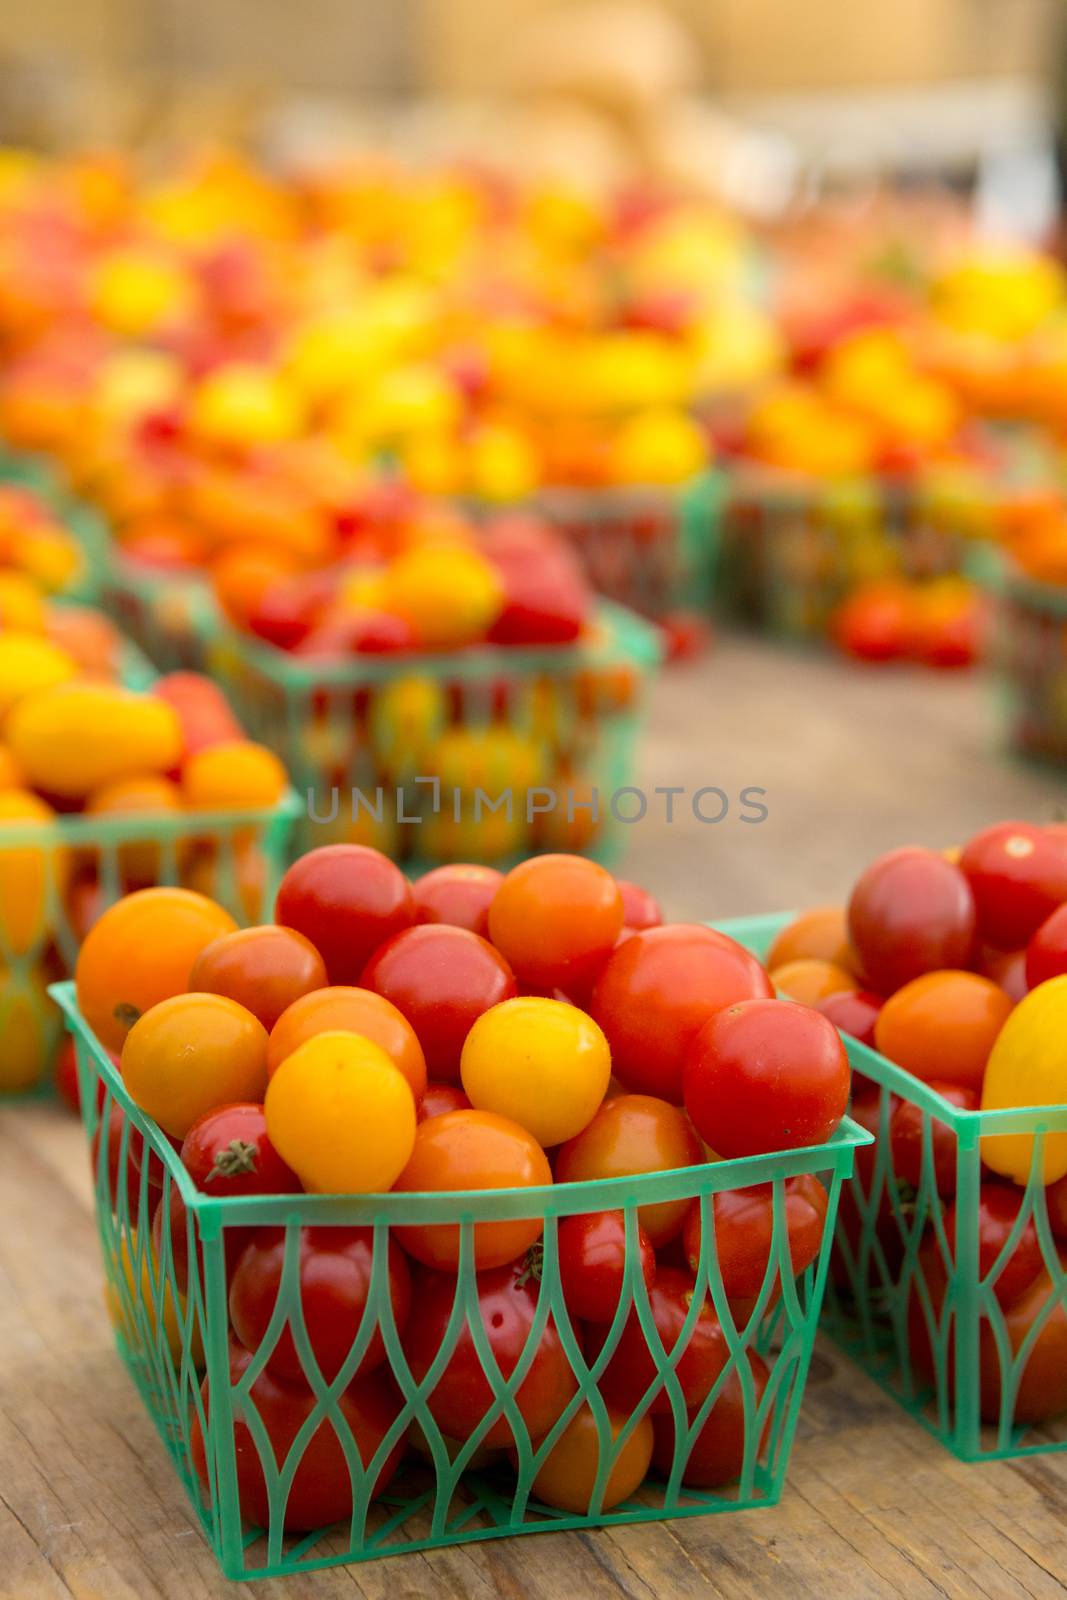 Organic tomatoes from a local market